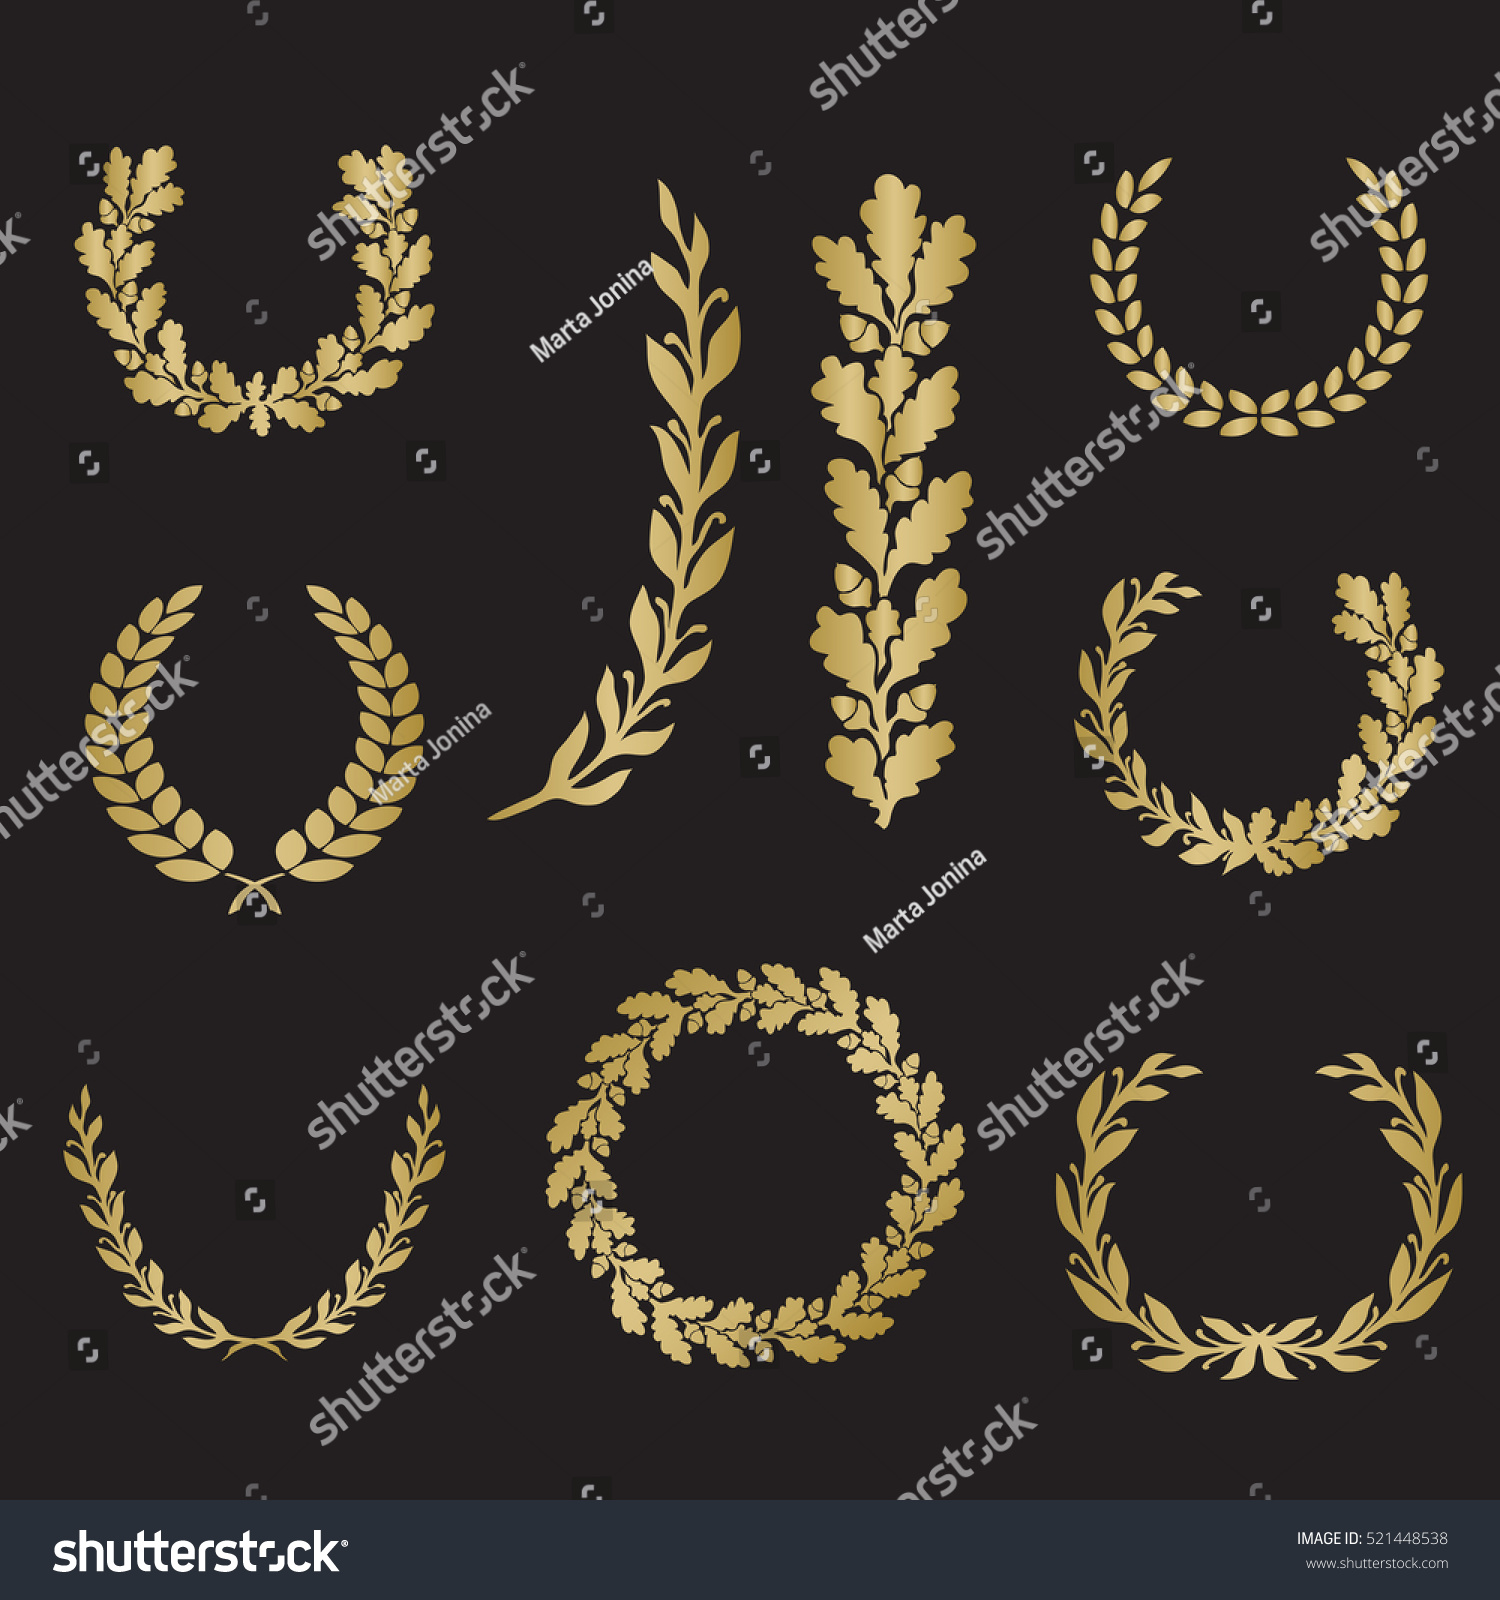 SVG of Silhouette laurel and oak wreaths in different  shapes - half circle, circle, branch in gold color svg